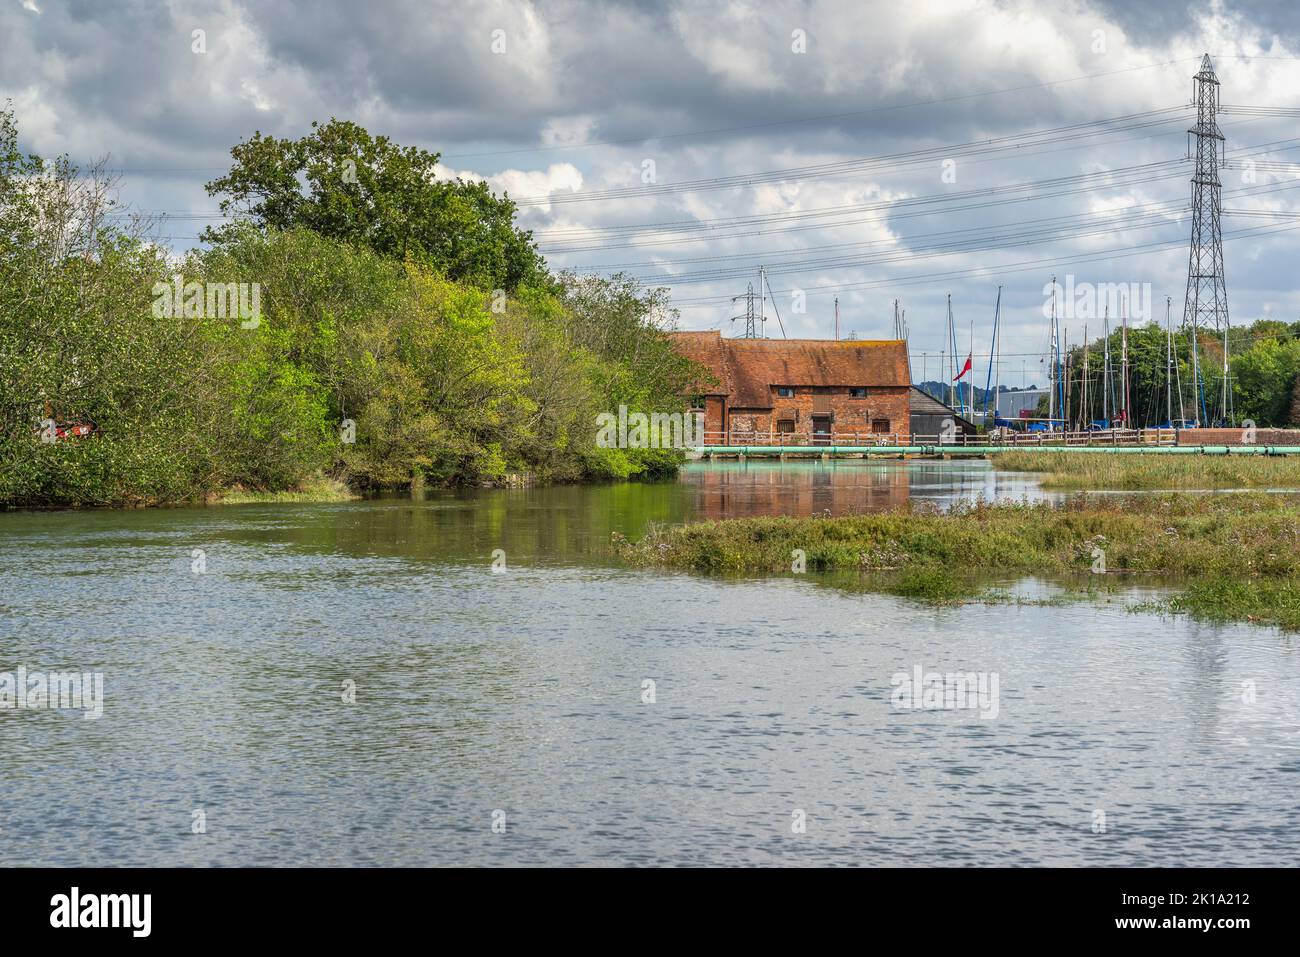 View over Bartley Water tidal estuary in Totton and Eling with the Eling tide mill in the background, Southampton, Hampshire, England, UK Stock Photo